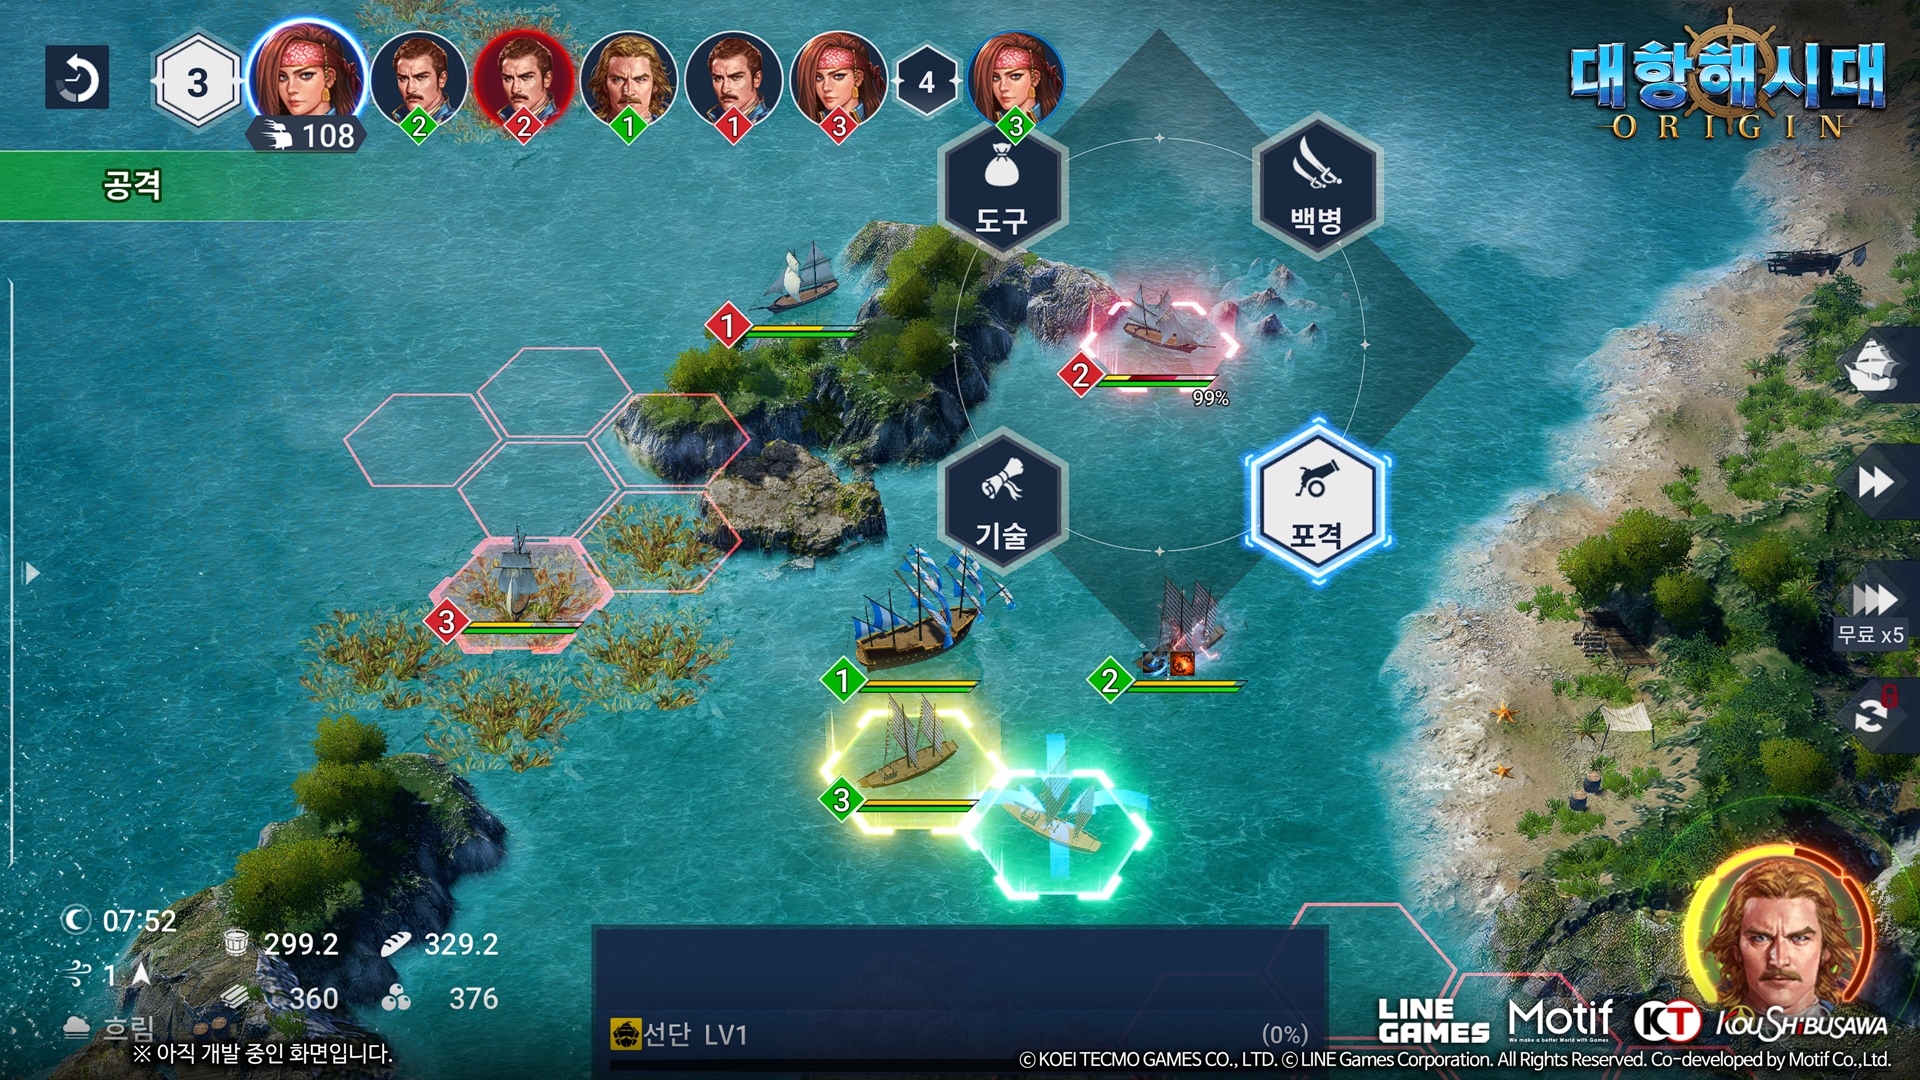 Uncharted Waters Origins Launches for PC and Mobile Devices